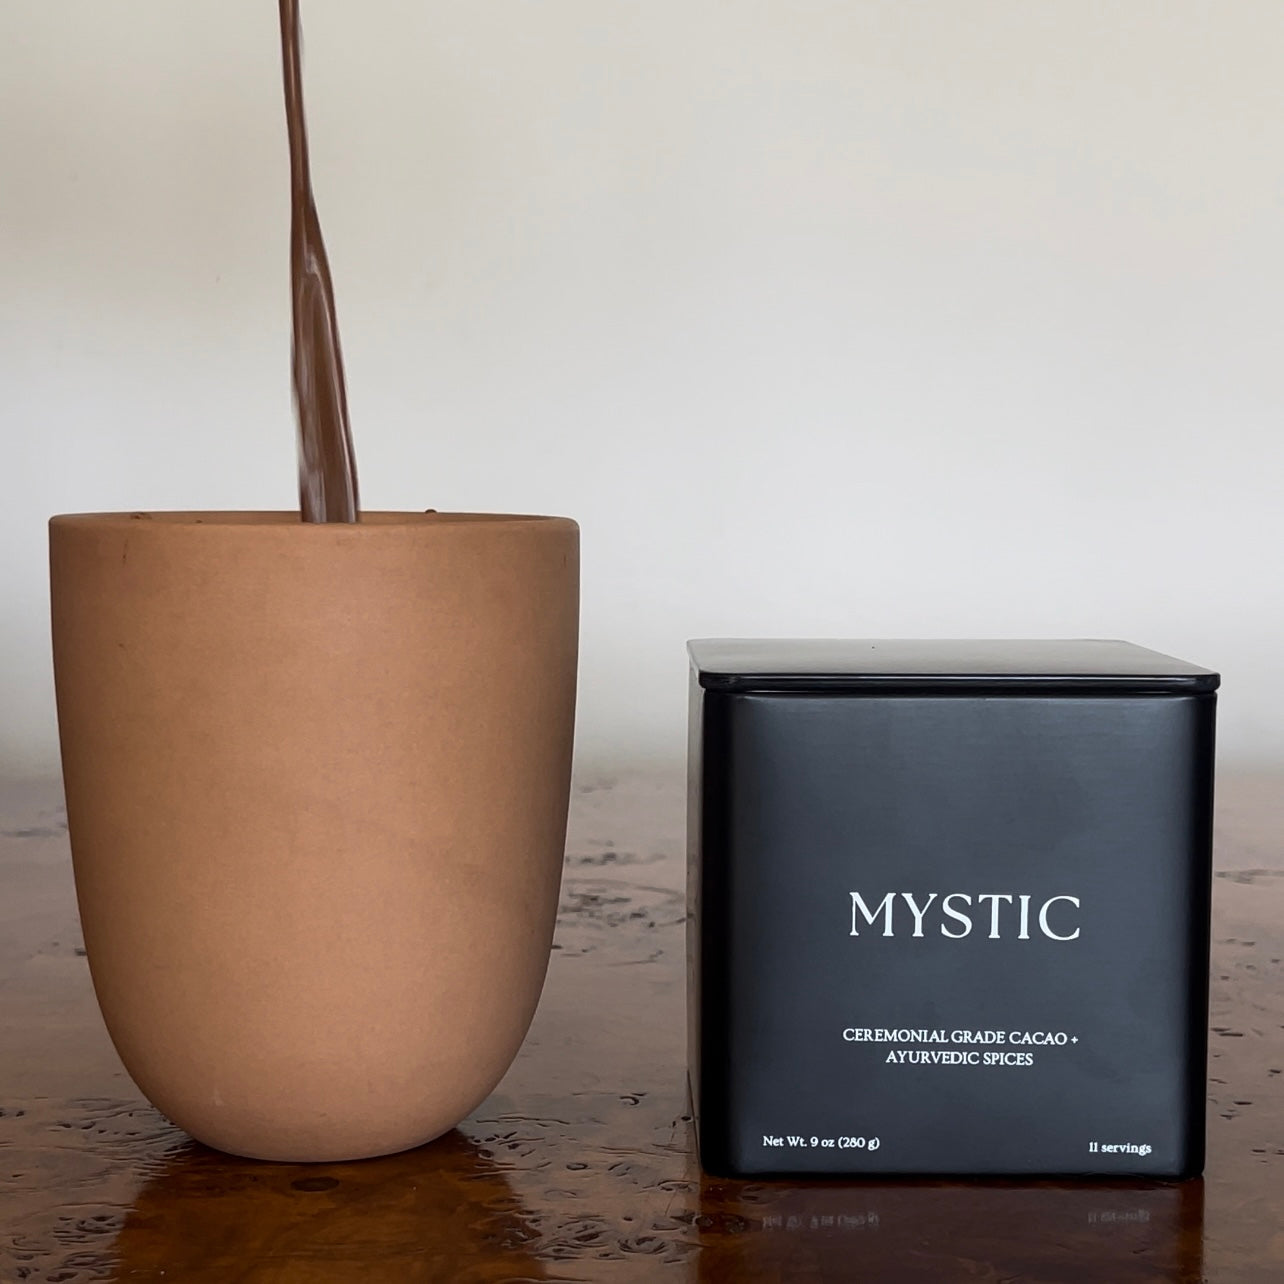 MYSTIC - Ceremonial Grade Cacao blend with Ayurvedic Spices